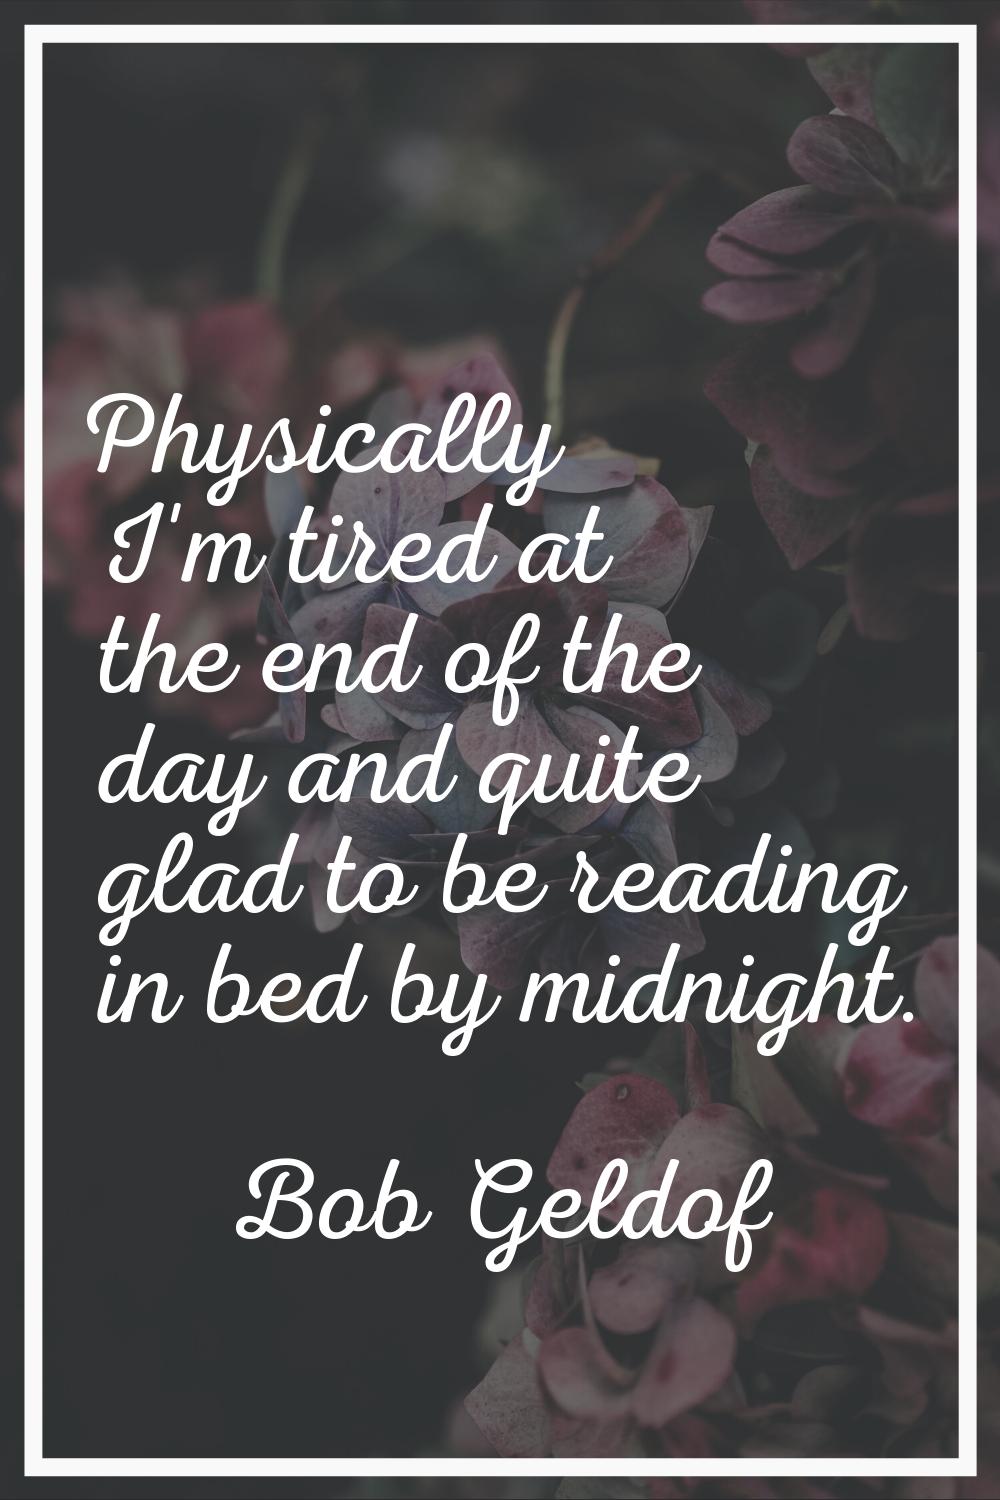 Physically I'm tired at the end of the day and quite glad to be reading in bed by midnight.